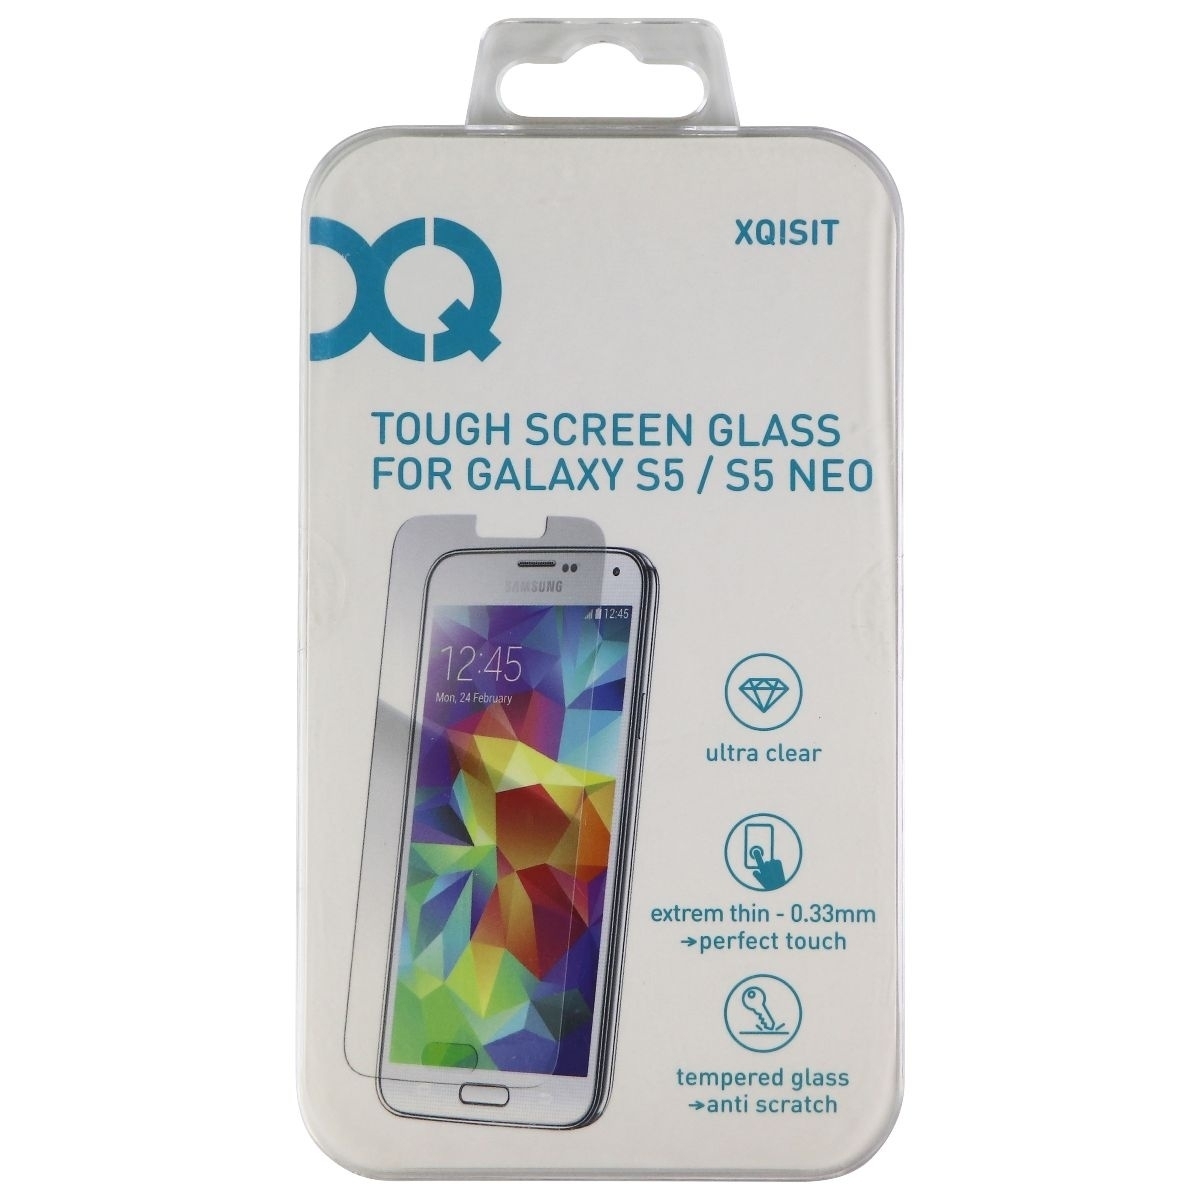 Xqisit Tough Screen Glass For Samsung Galaxy S5 (2014) Smartphones - Clear